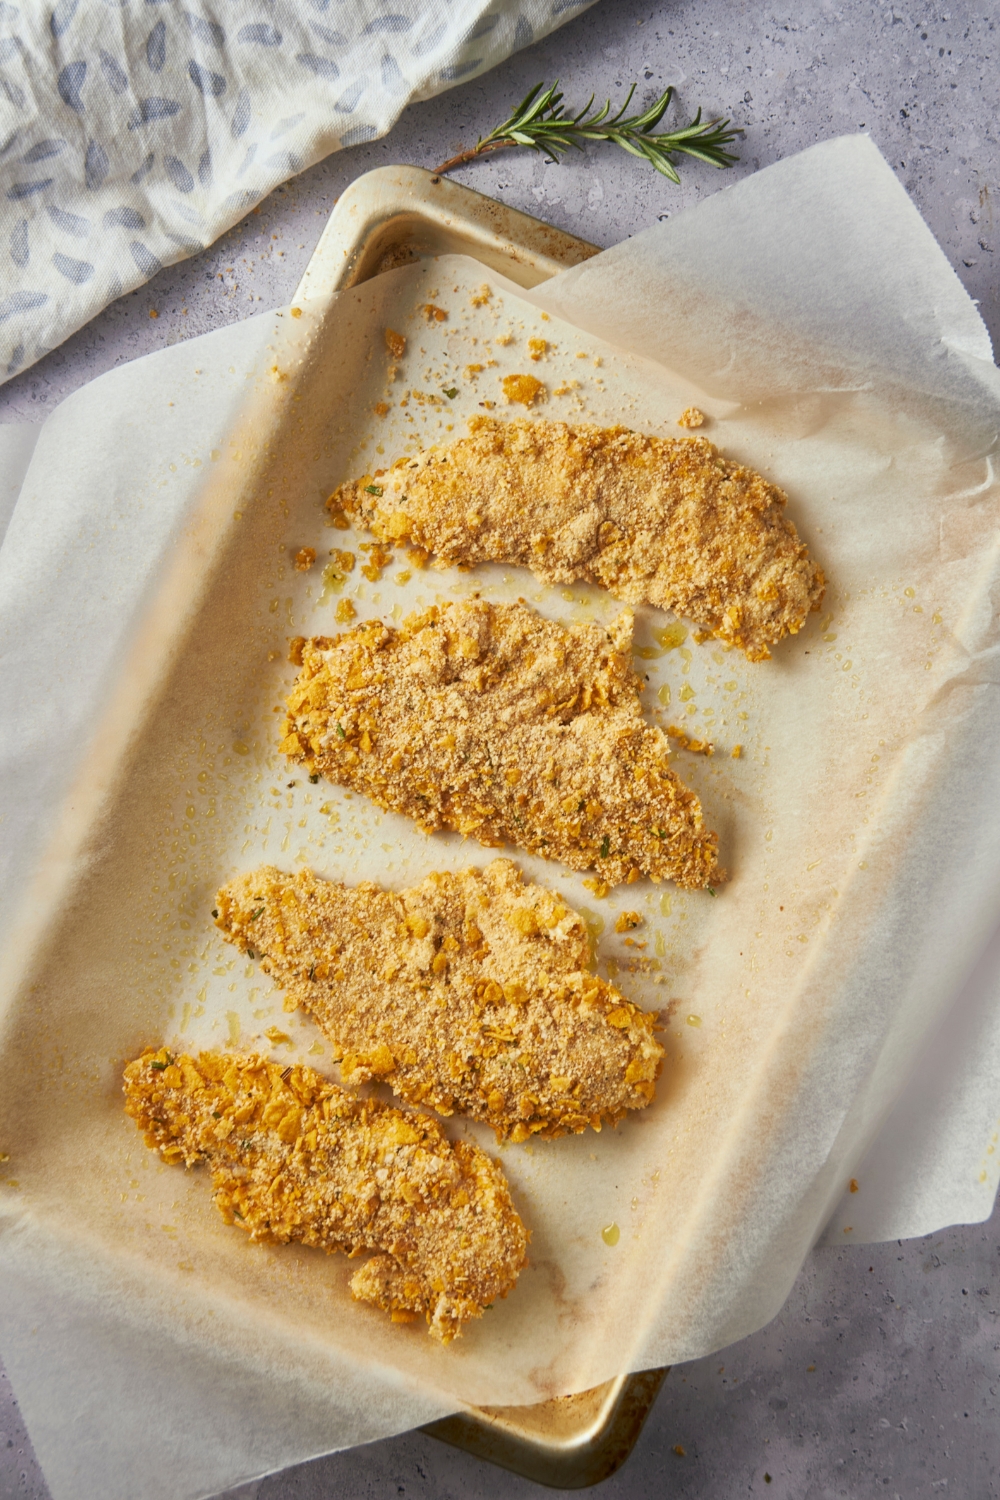 Four pieces of breaded chicken tenders on a baking sheet lined with parchment paper.